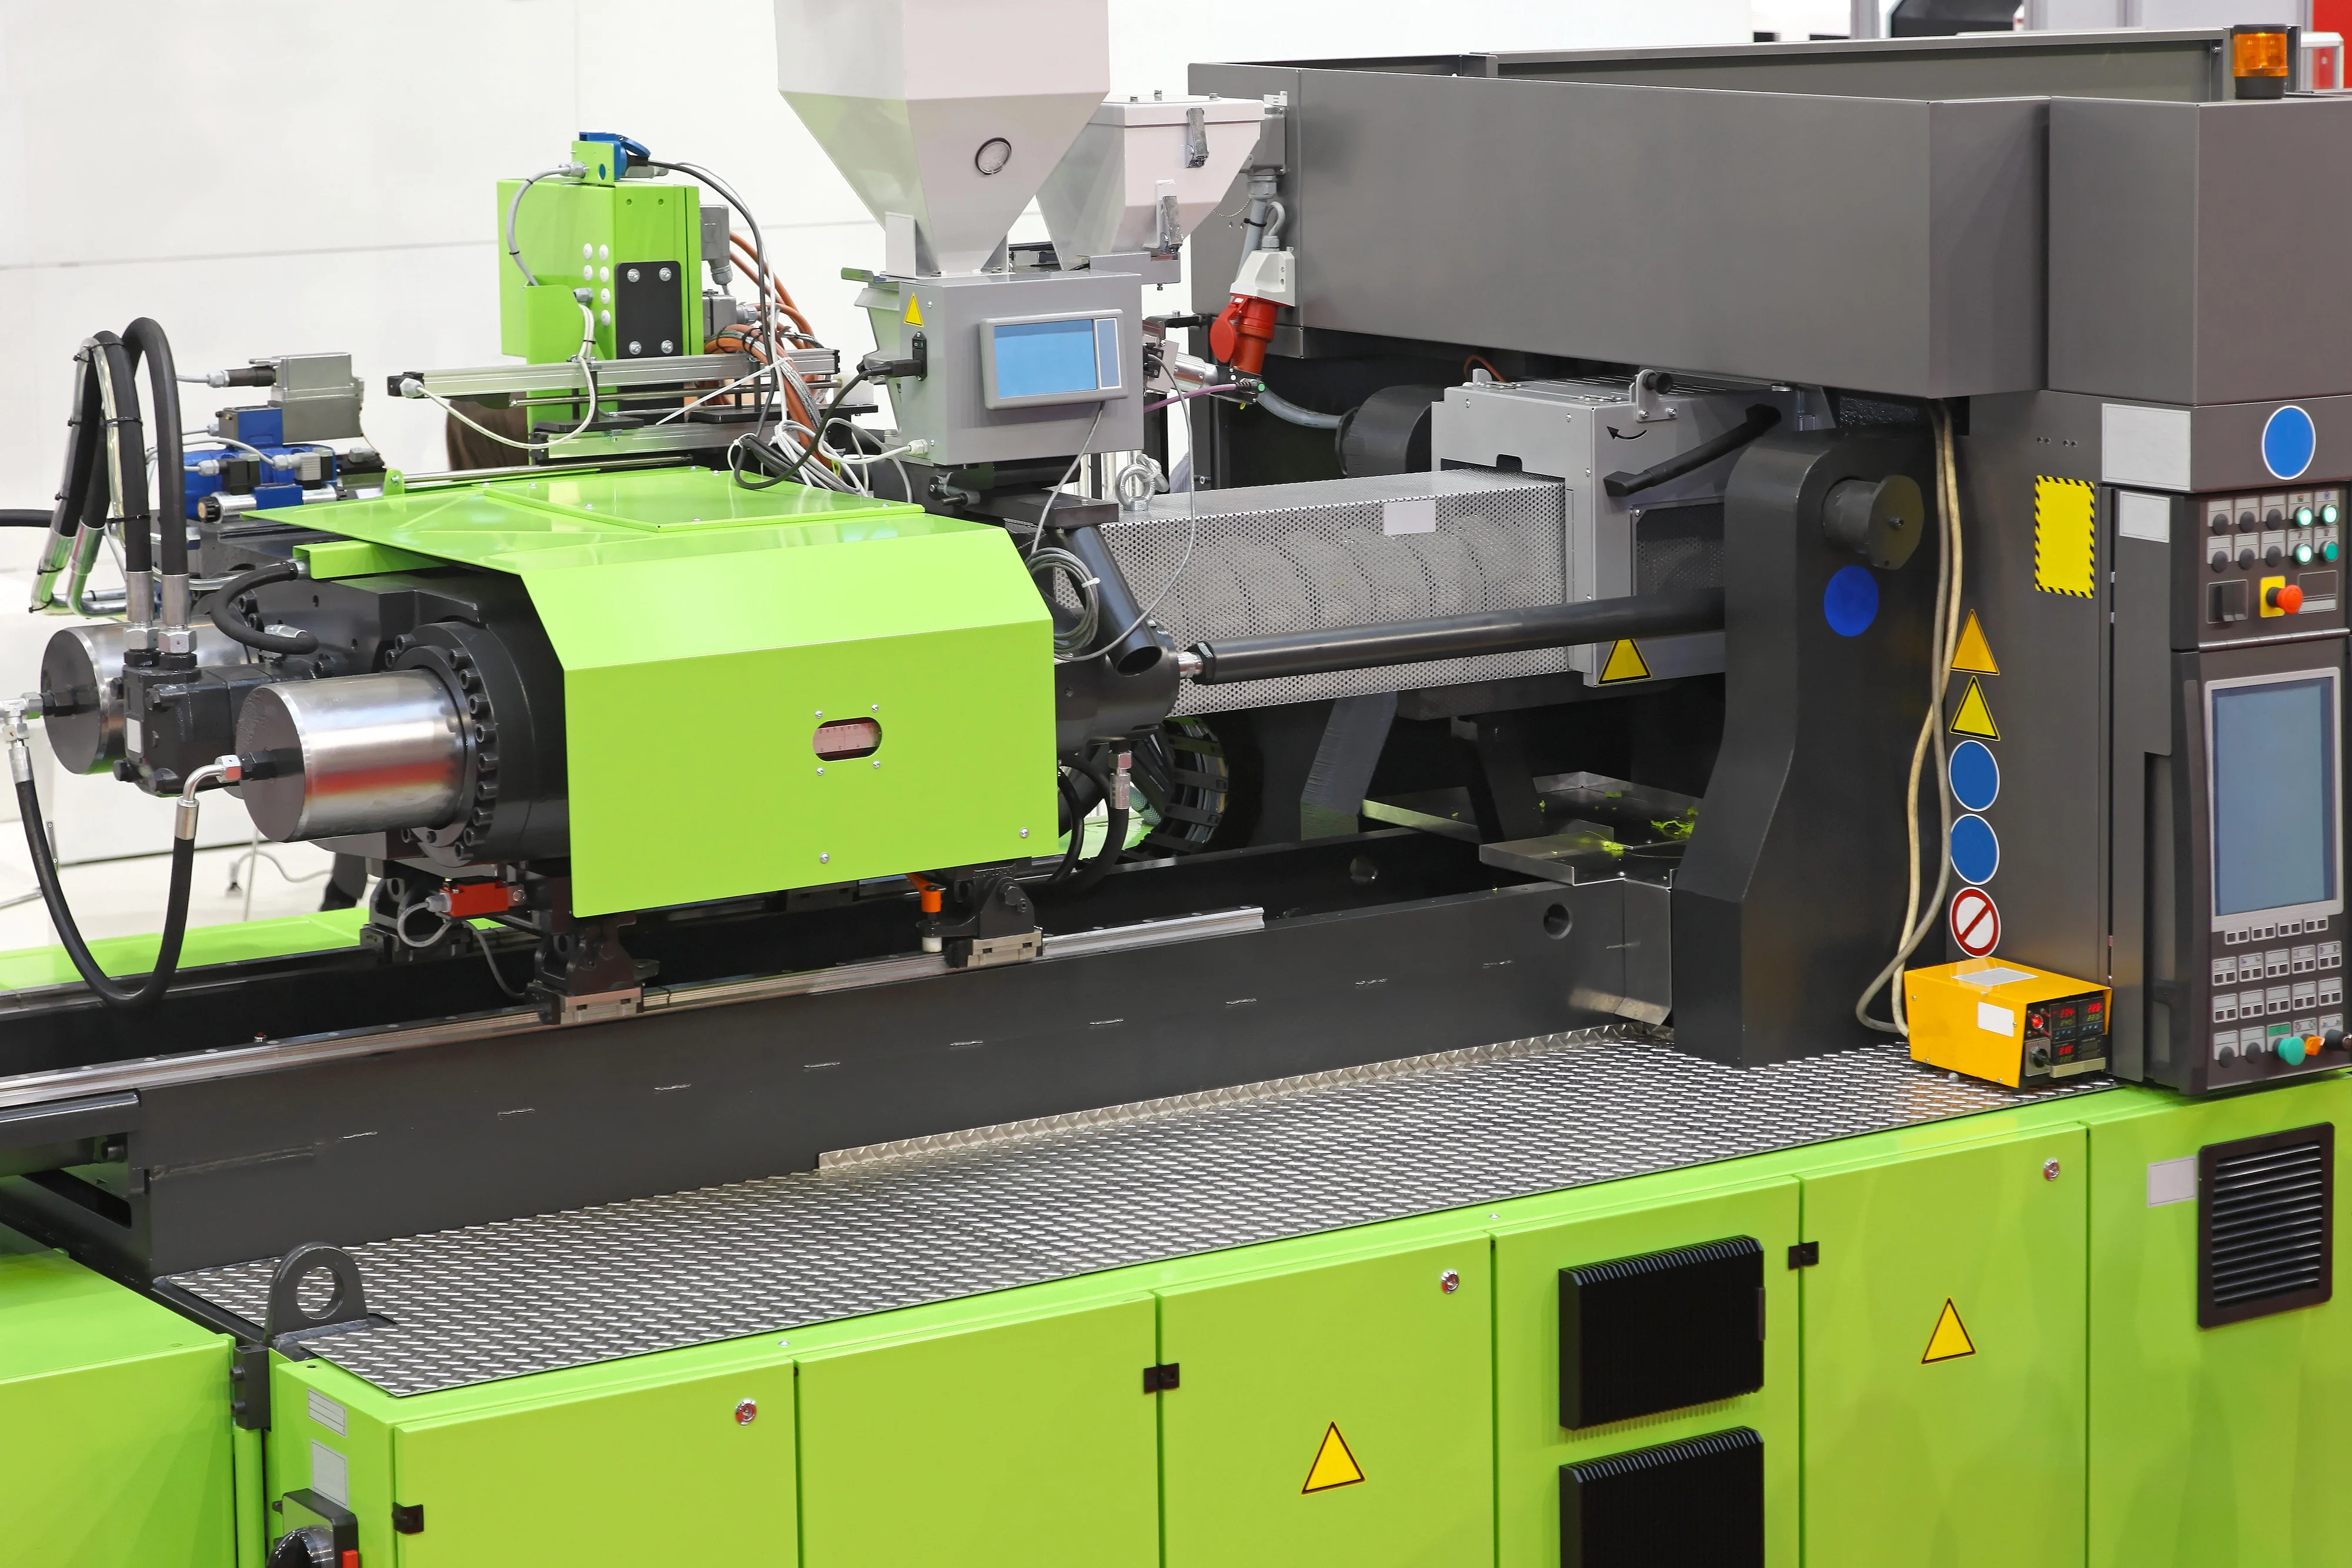 Thermoset vs. Thermoplastic: How to Choose for Plastic Injection Molding? 